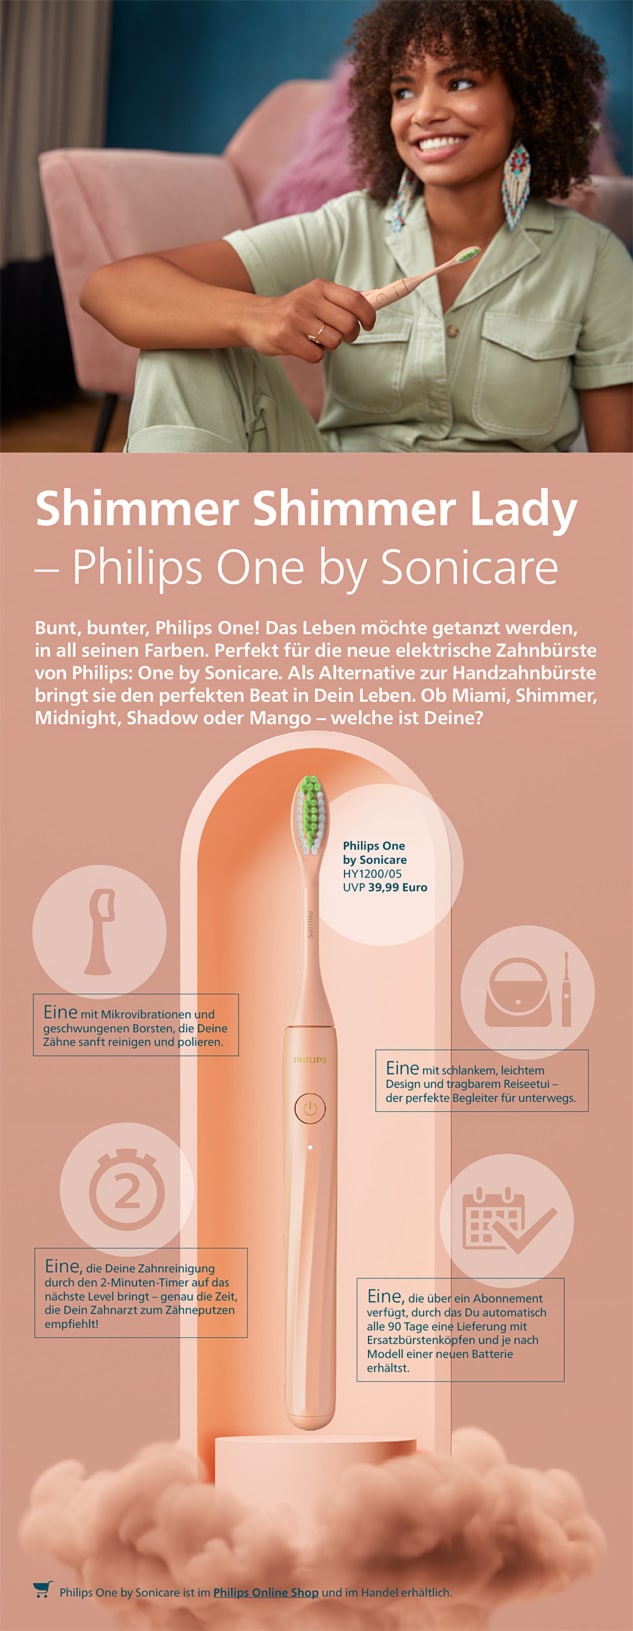 Philips Themensheet - Philips One by Sonicare - Shimmer download pdf